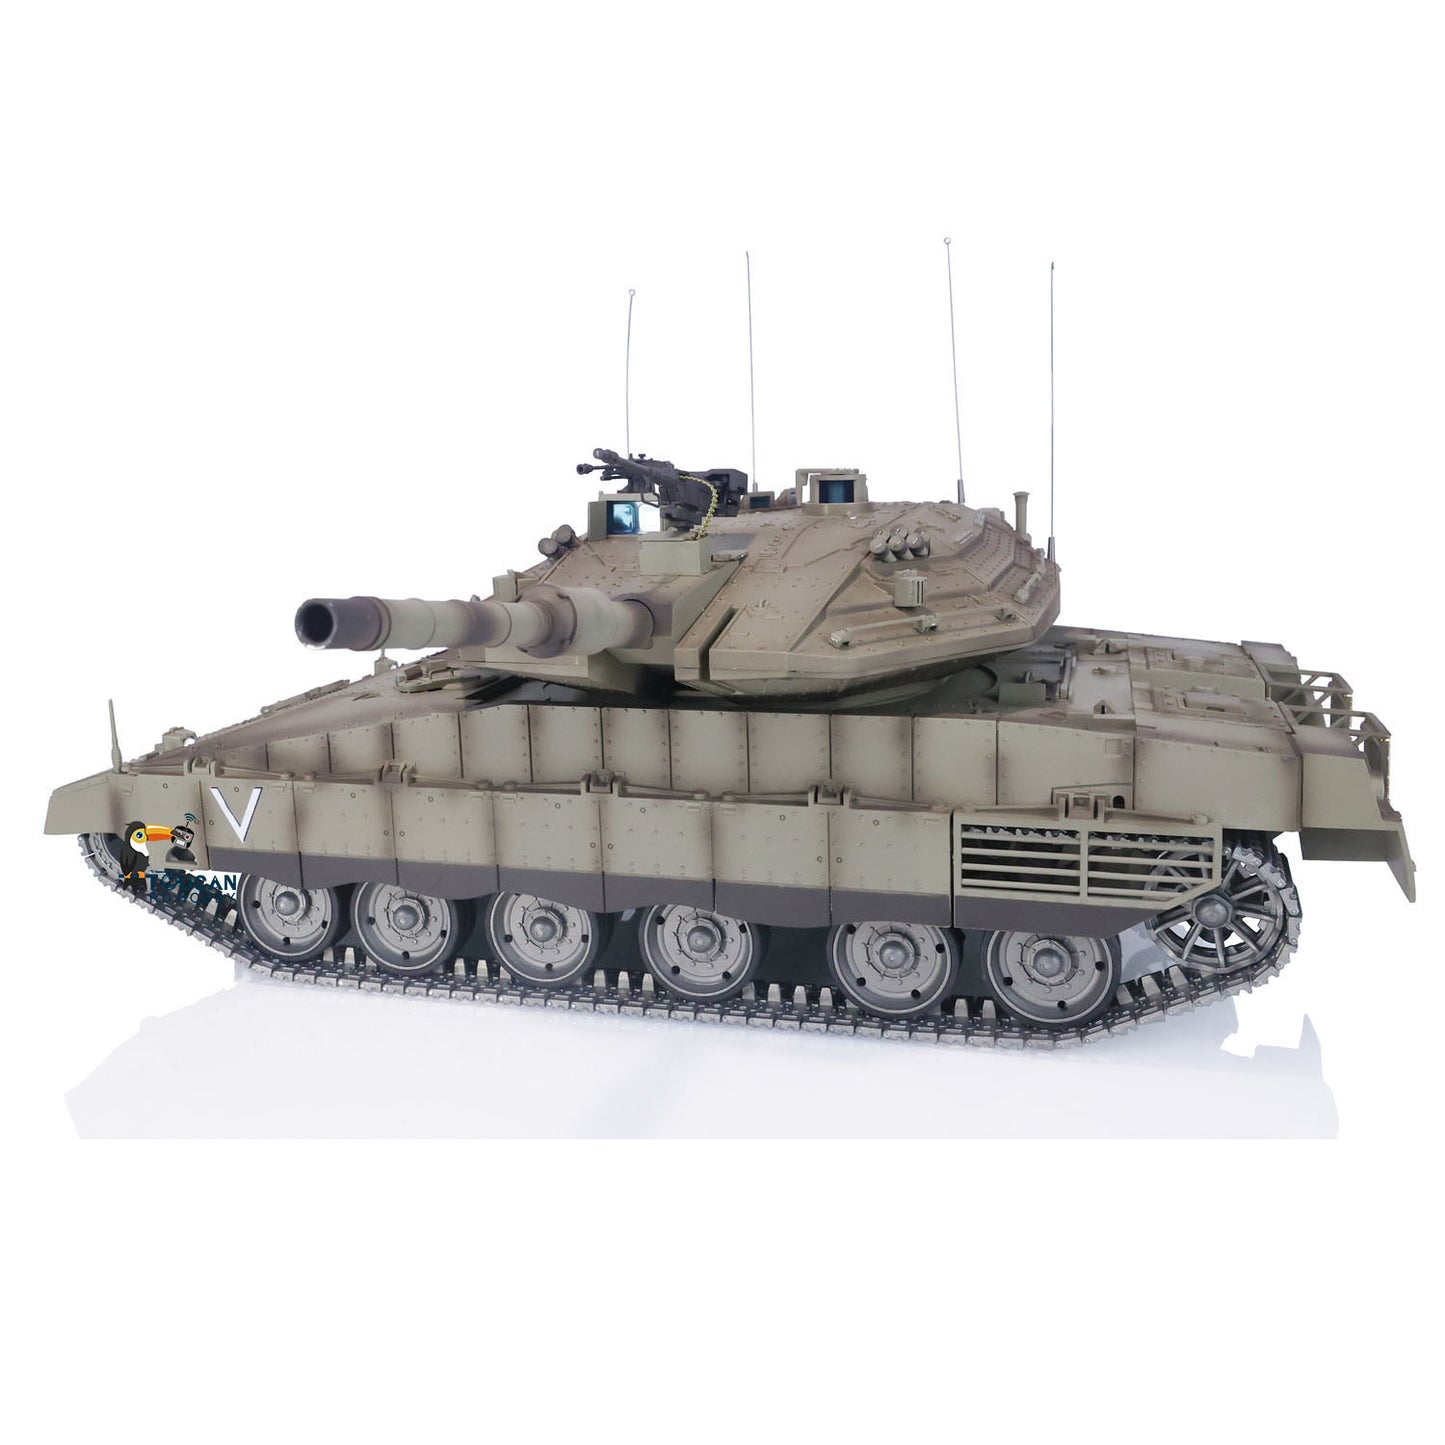 Heng Long Remote Control Tank 1/16 IDF Merkava MK IV Professional Edition Tanks First Person View Metal Driving System Boys Gifts